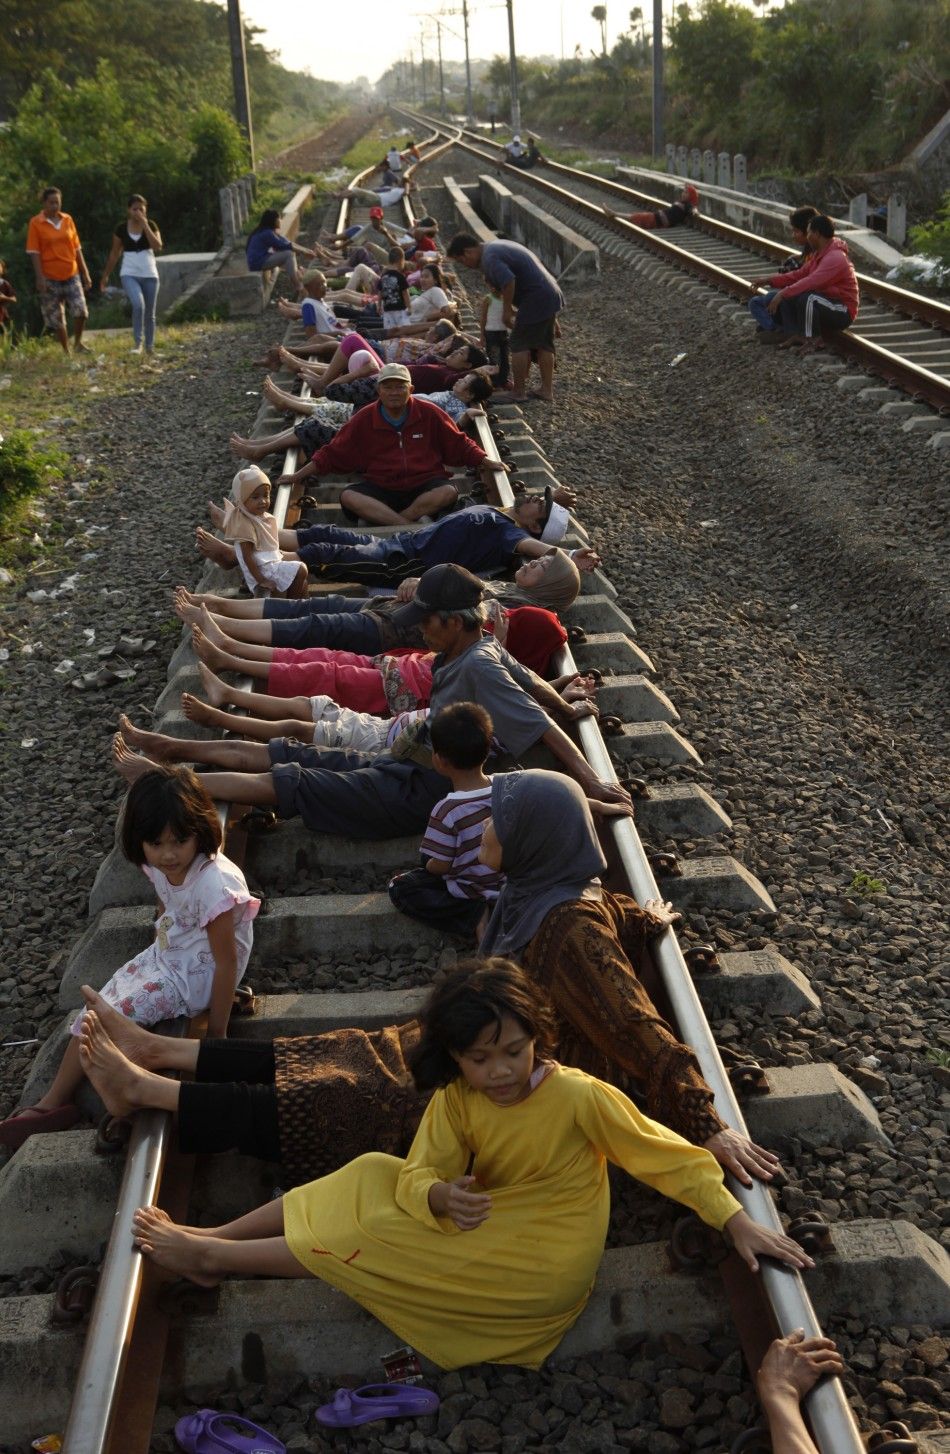 Railway Therapy in Indonesia Lie on the tracks